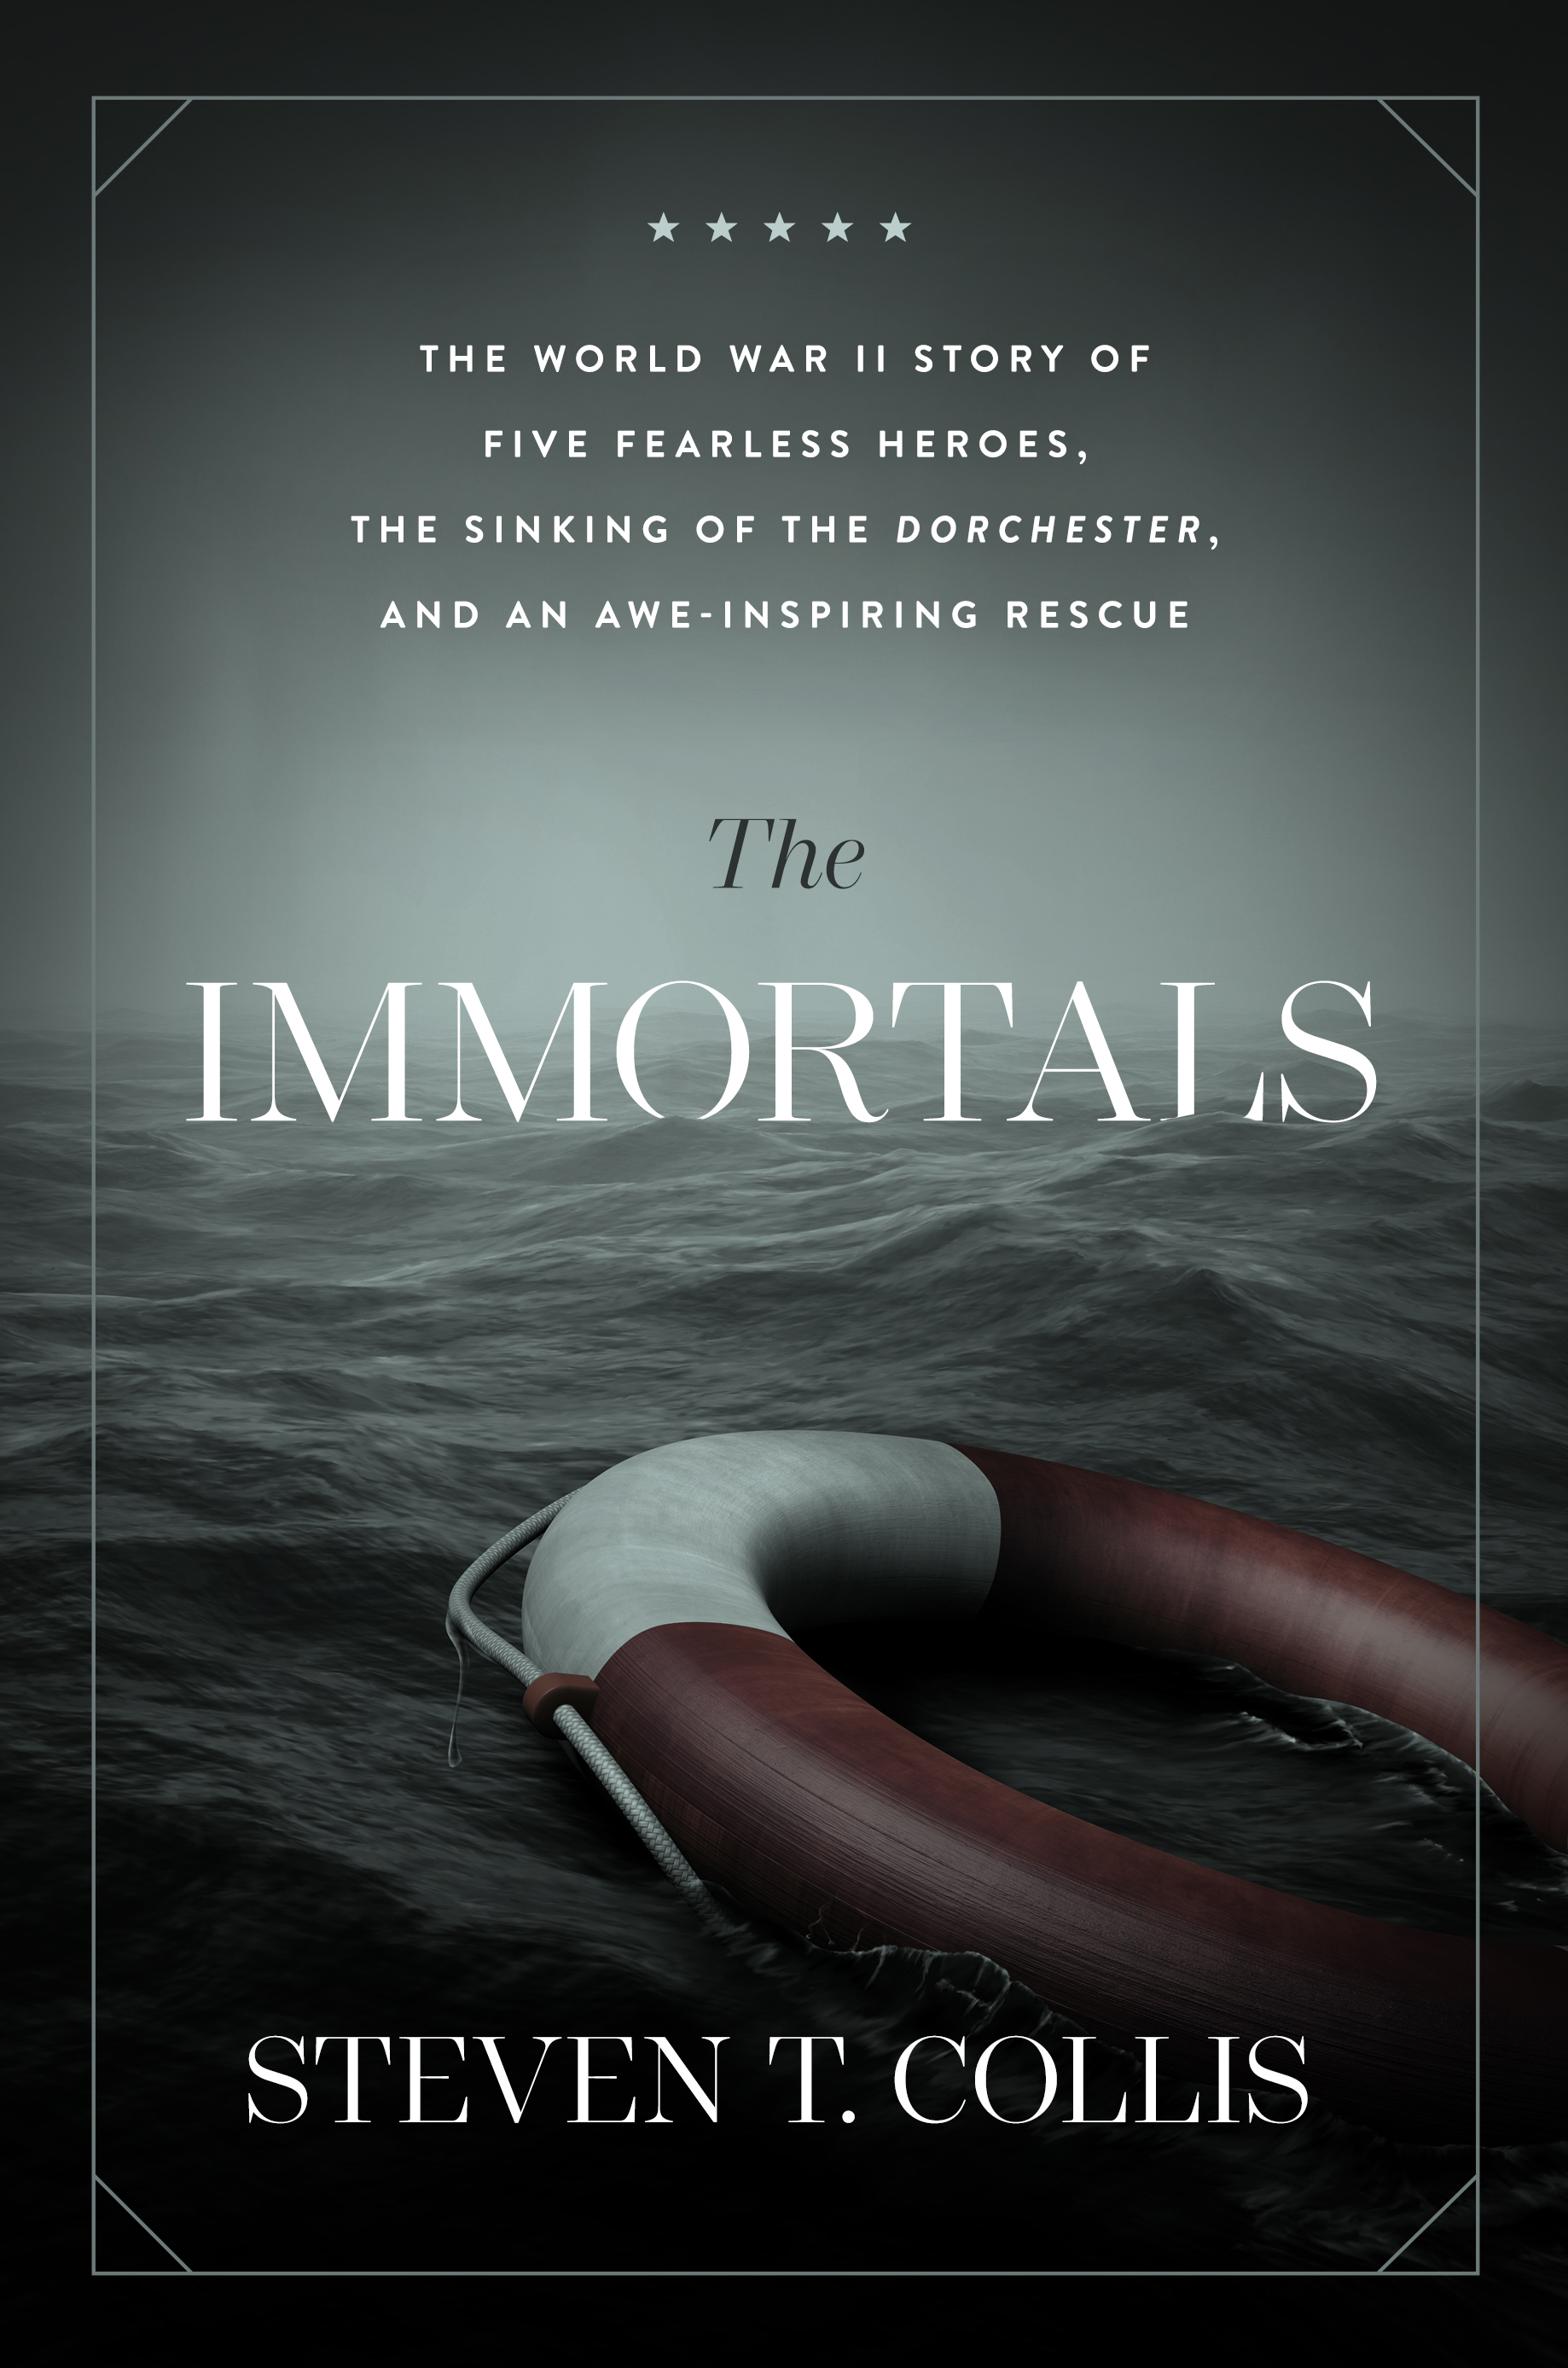 New Book Chronicles Story of WWII Heroes Who Saved Hundreds - the Immortal Chaplains and Charles W. David, Jr.